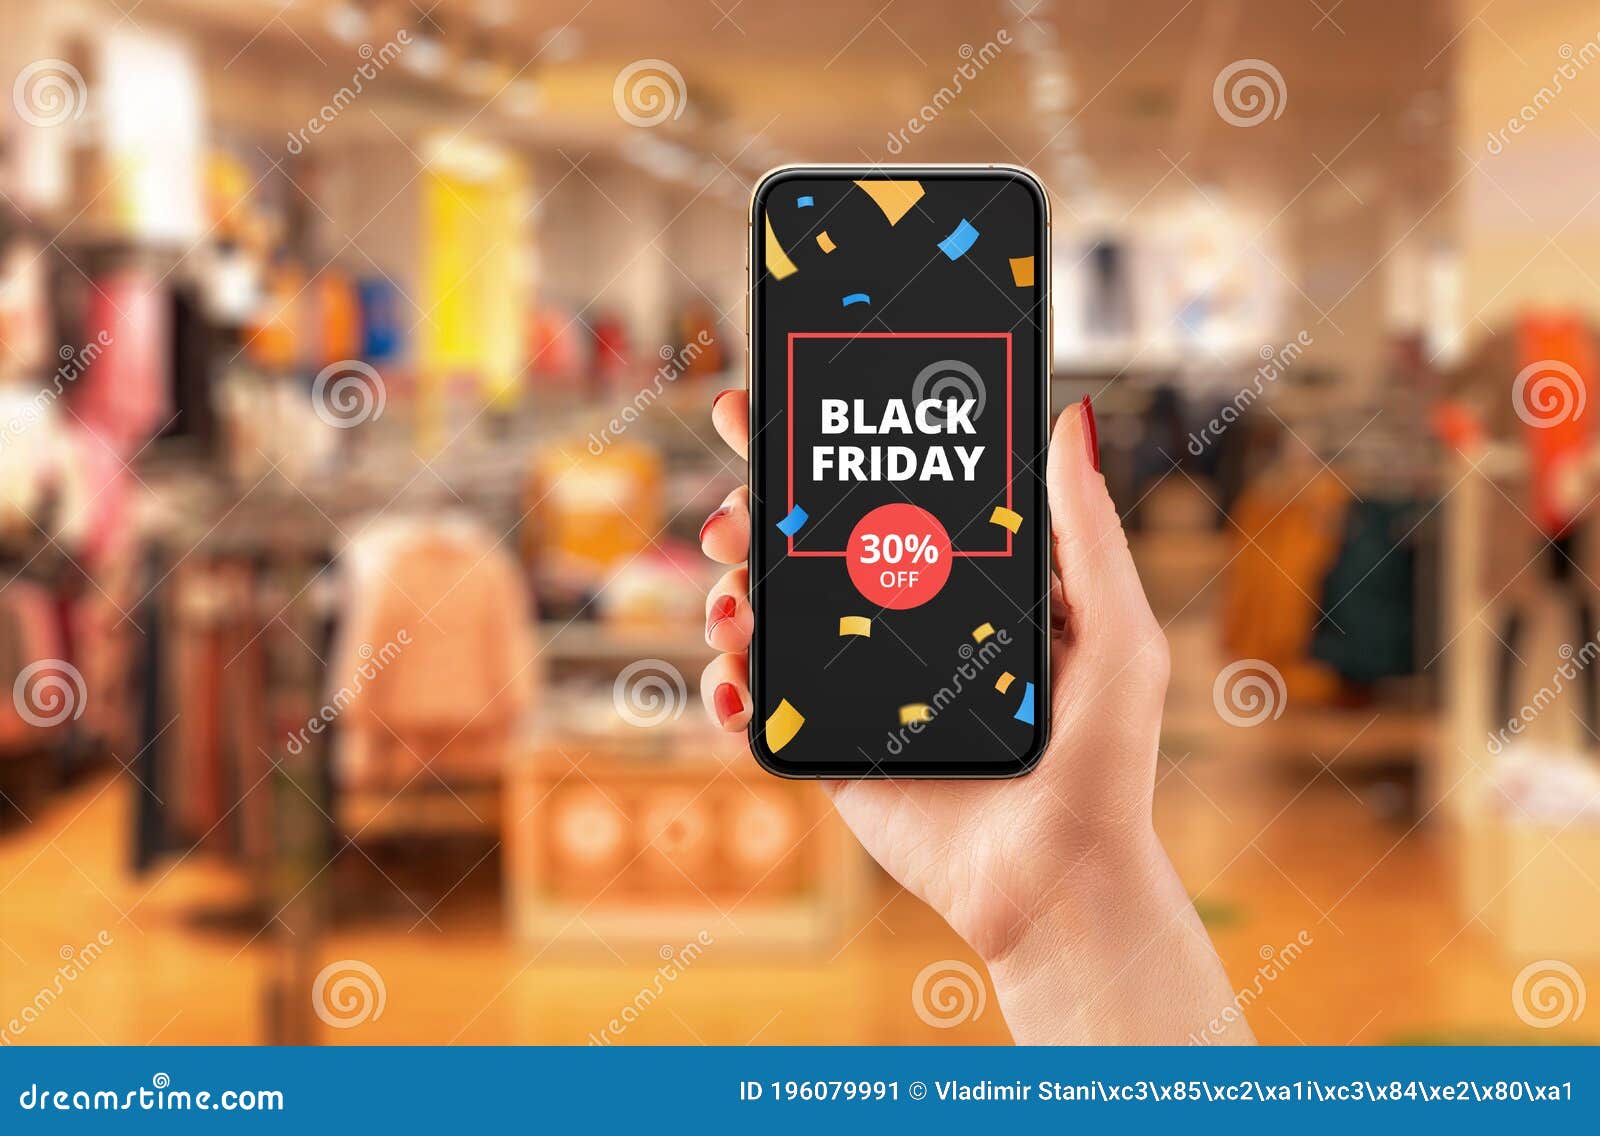 black friday discount advert on smart phone in woman hand